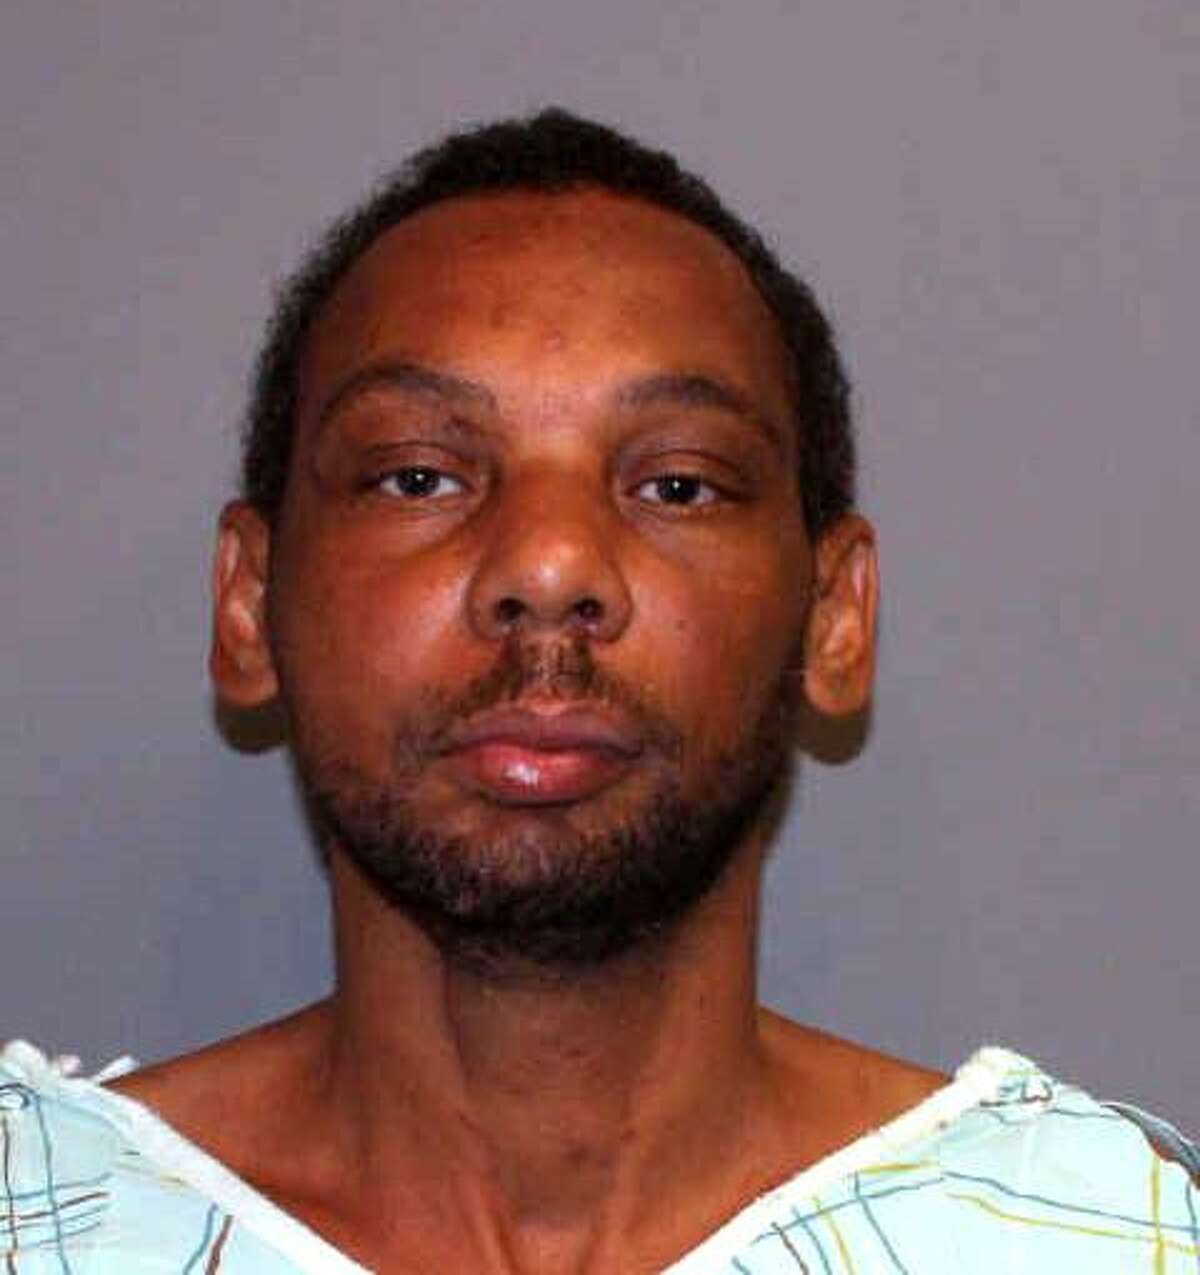 The Norwalk Department of Police Service has arrested Bertony Thompson, a 44-year-old Norwalk resident for the murder of Jackie Silverman, which occurred on September 10, 2014 at 41 Wolfpit Ave. in Norwalk, Conn. Thompson has been charged with Murder and is being held on a court set bond of $1,000,000.00. Thompson will be in Norwalk court on Monday September 15, 2014.